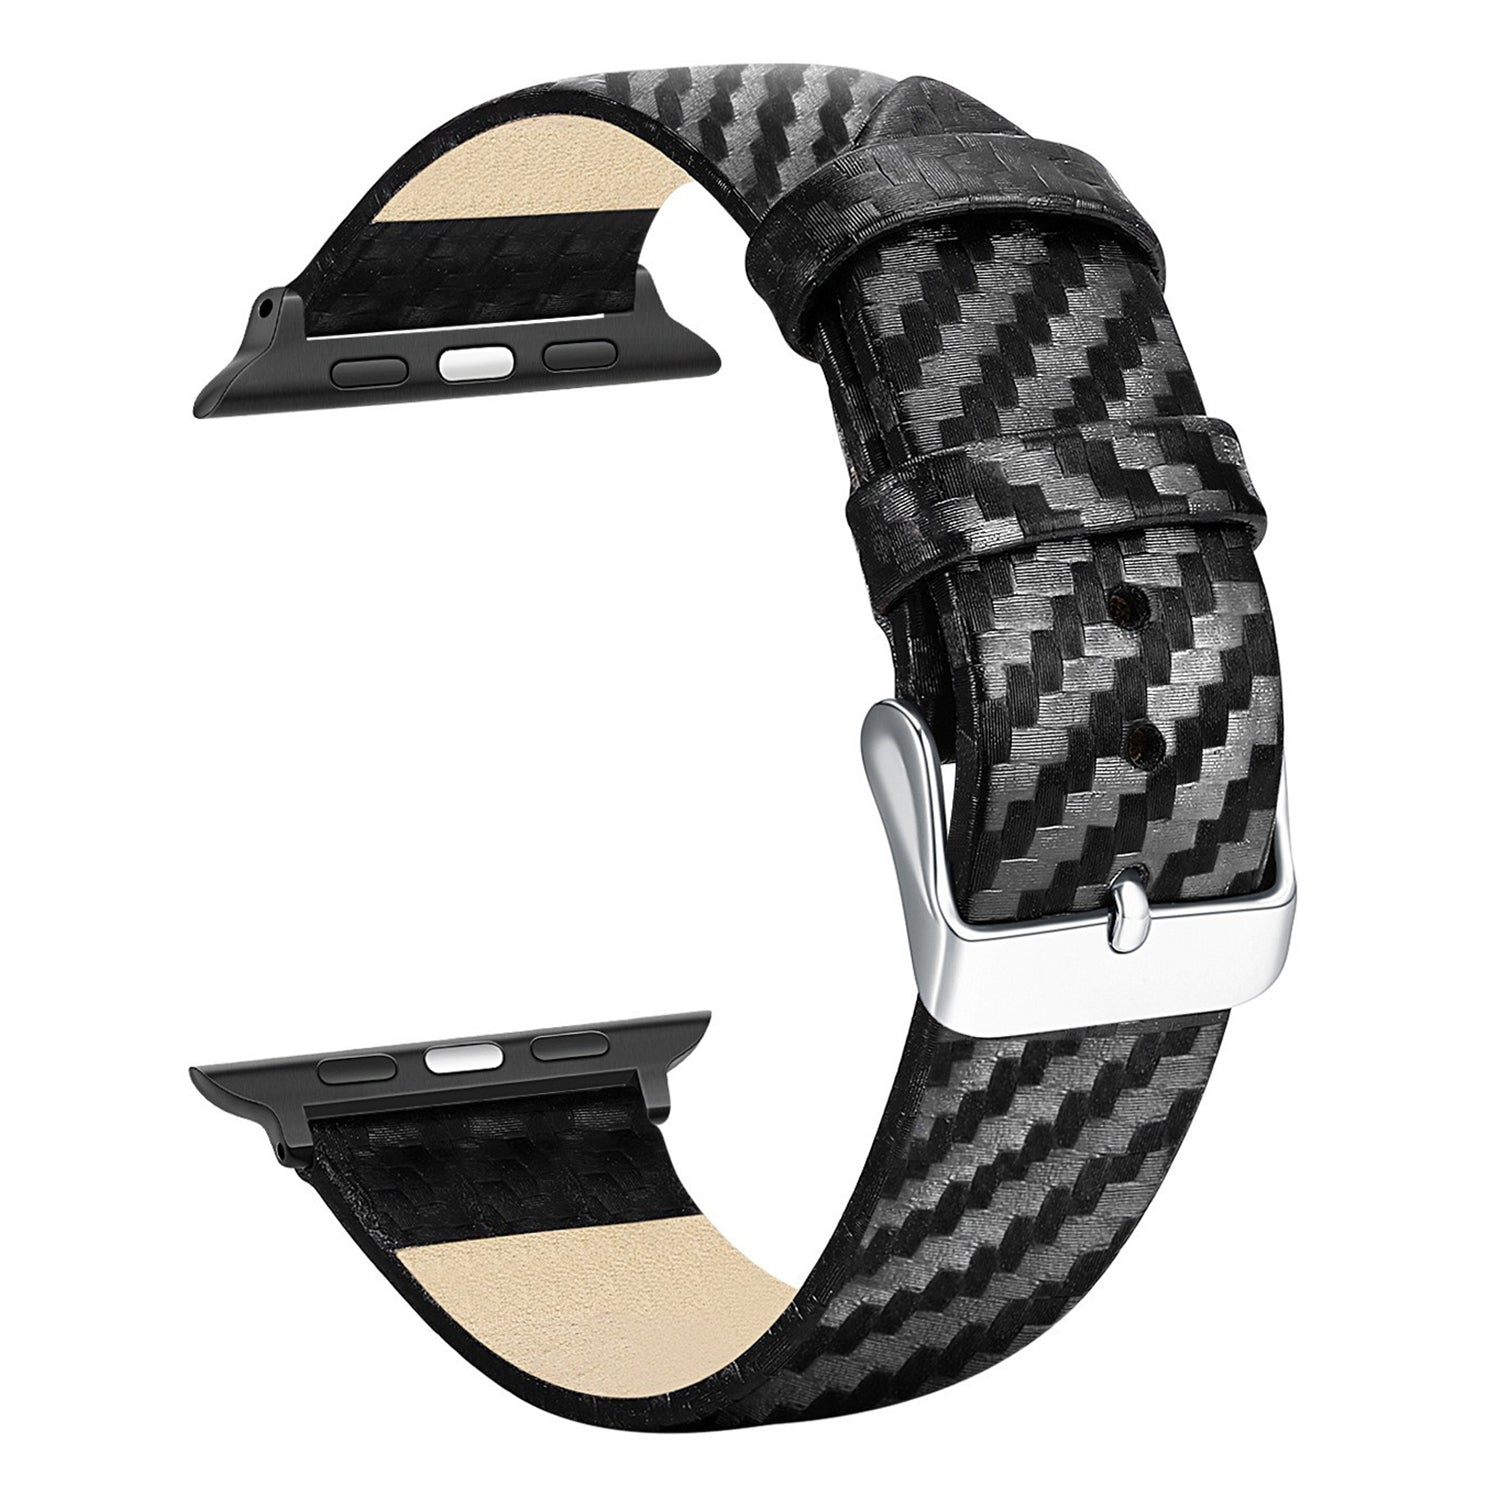 Carbon Fiber PC Watch Case Cover + Genuine Leather Adjustable Watchband for Apple Watch SE 40mm / Watch Series 4/5/6 40mm